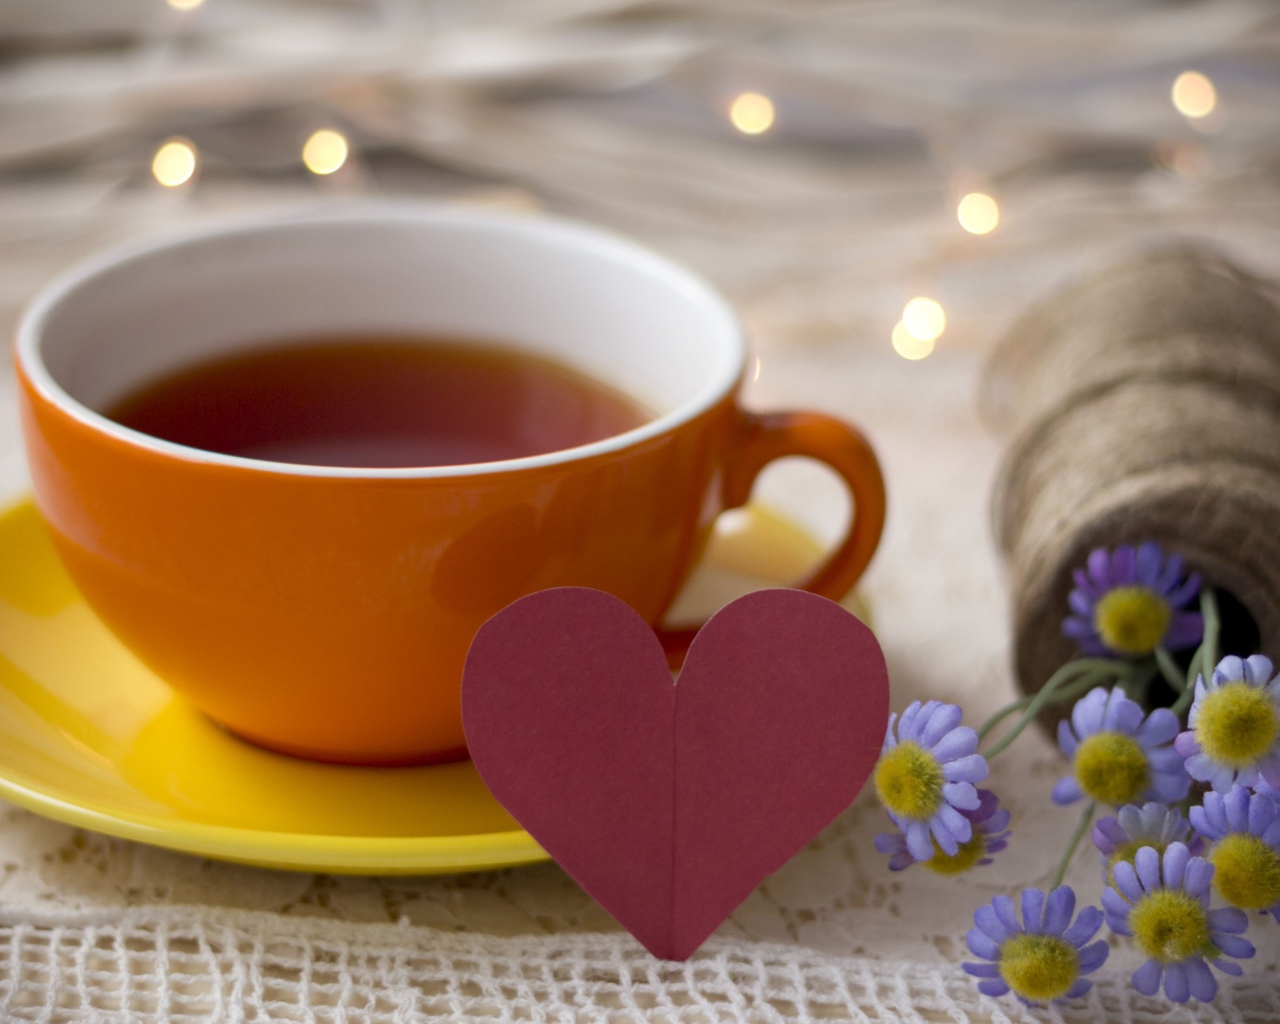 Tea Made With Love wallpaper 1280x1024